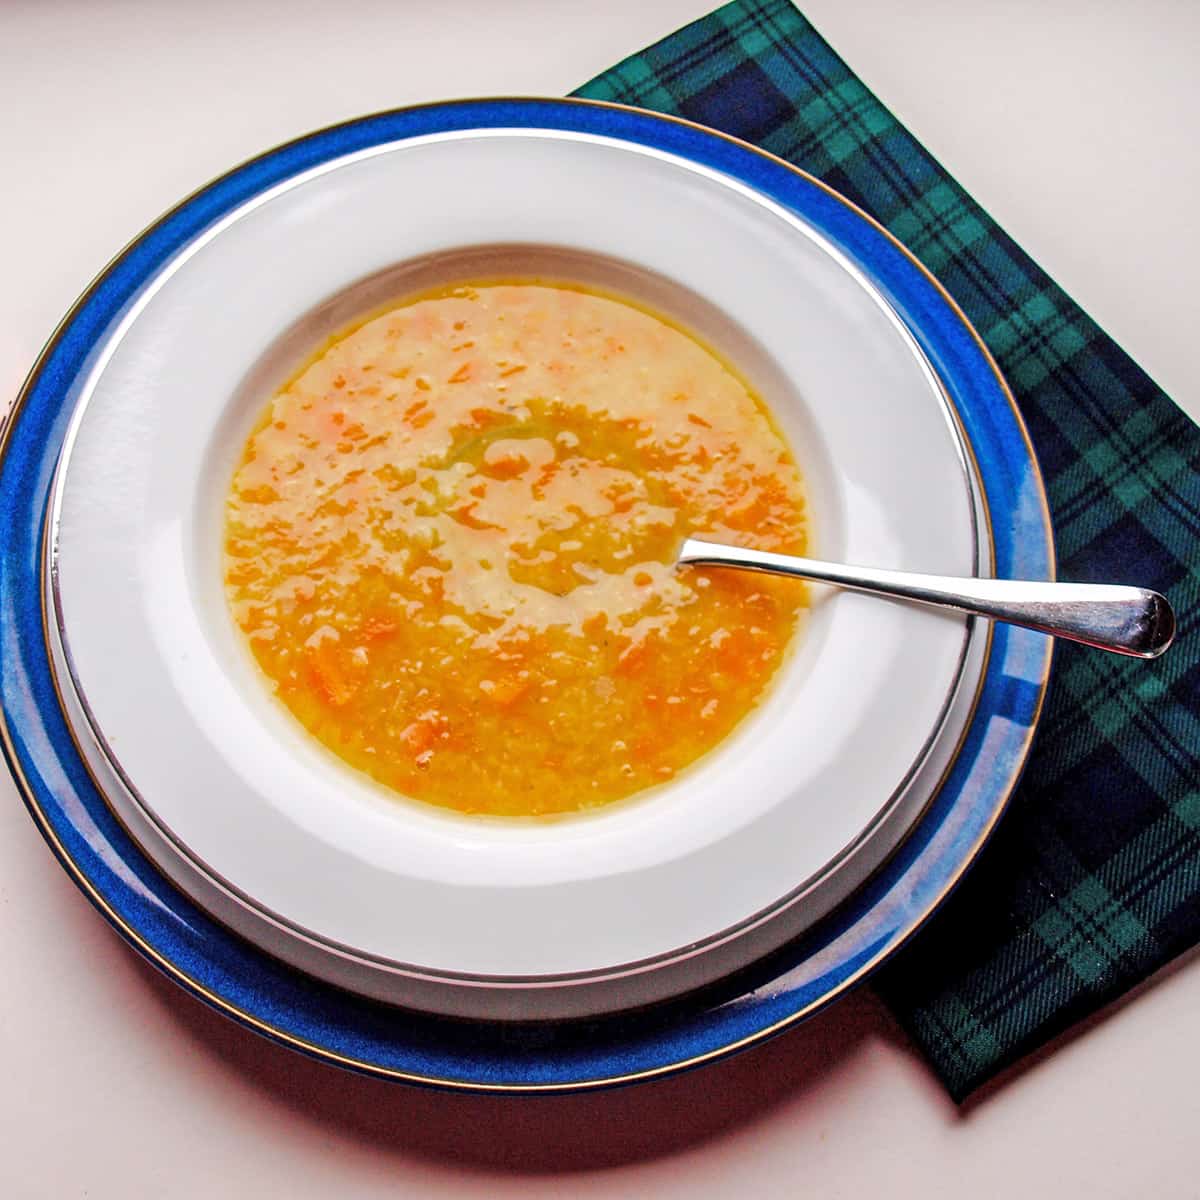 Scottish Red Lentil Soup in bowl with spoon